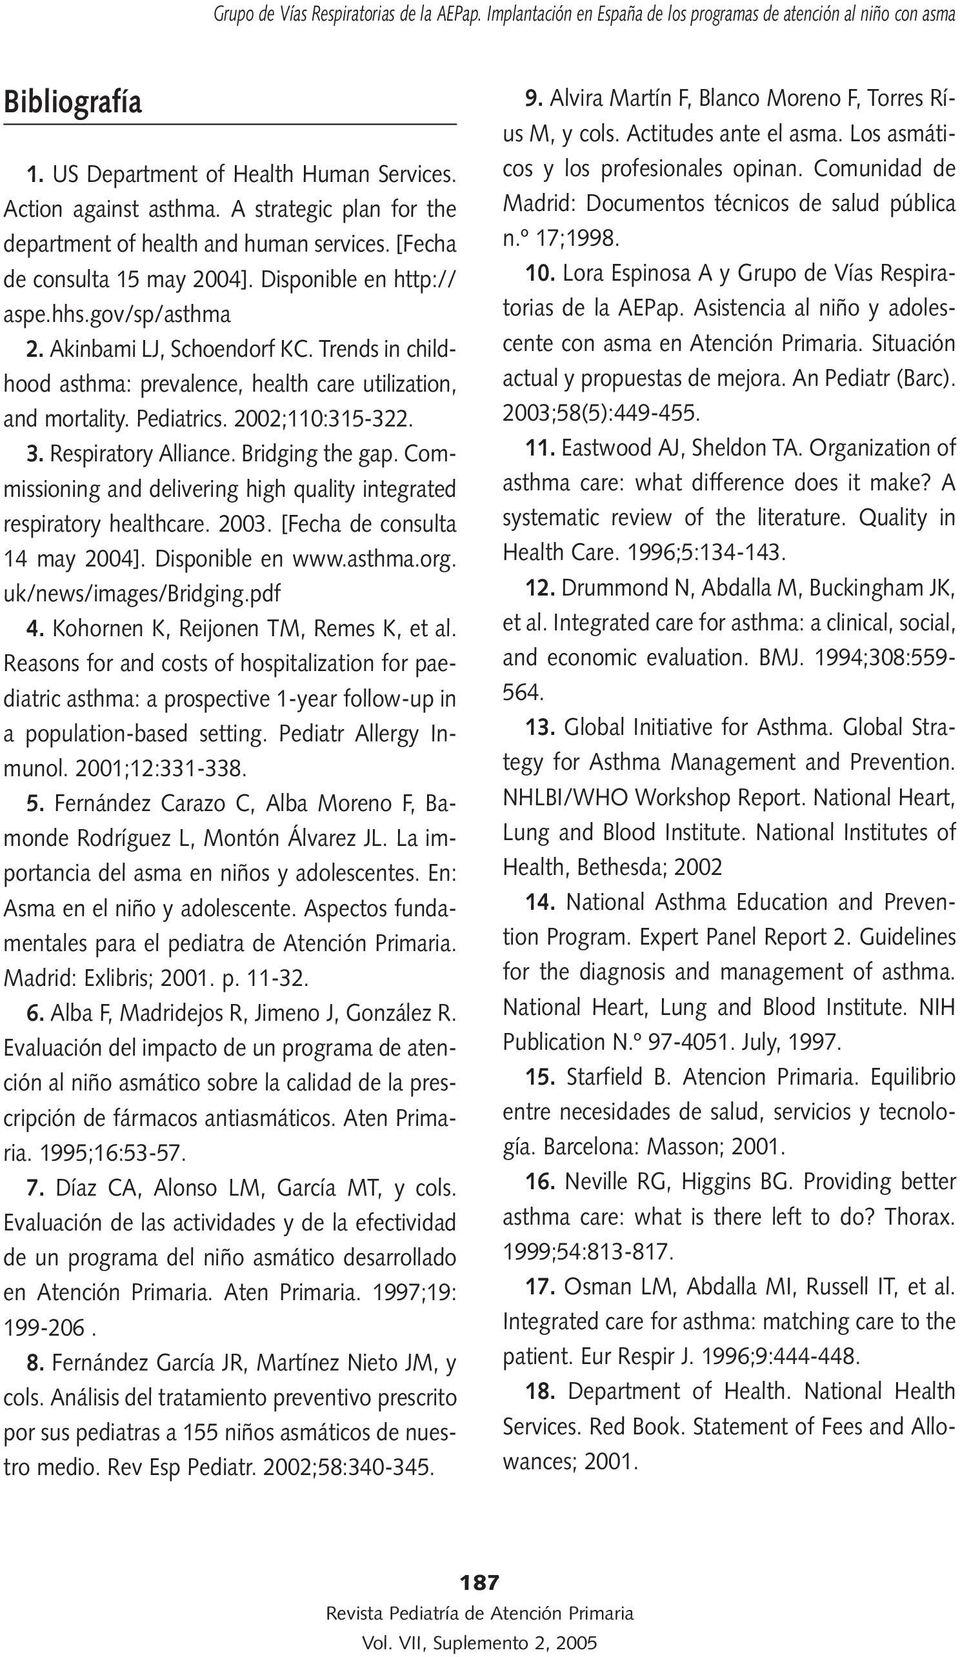 Respiratory Alliance. Bridging the gap. Commissioning and delivering high quality integrated respiratory healthcare. 2003. [Fecha de consulta 14 may 2004]. Disponible en www.asthma.org.